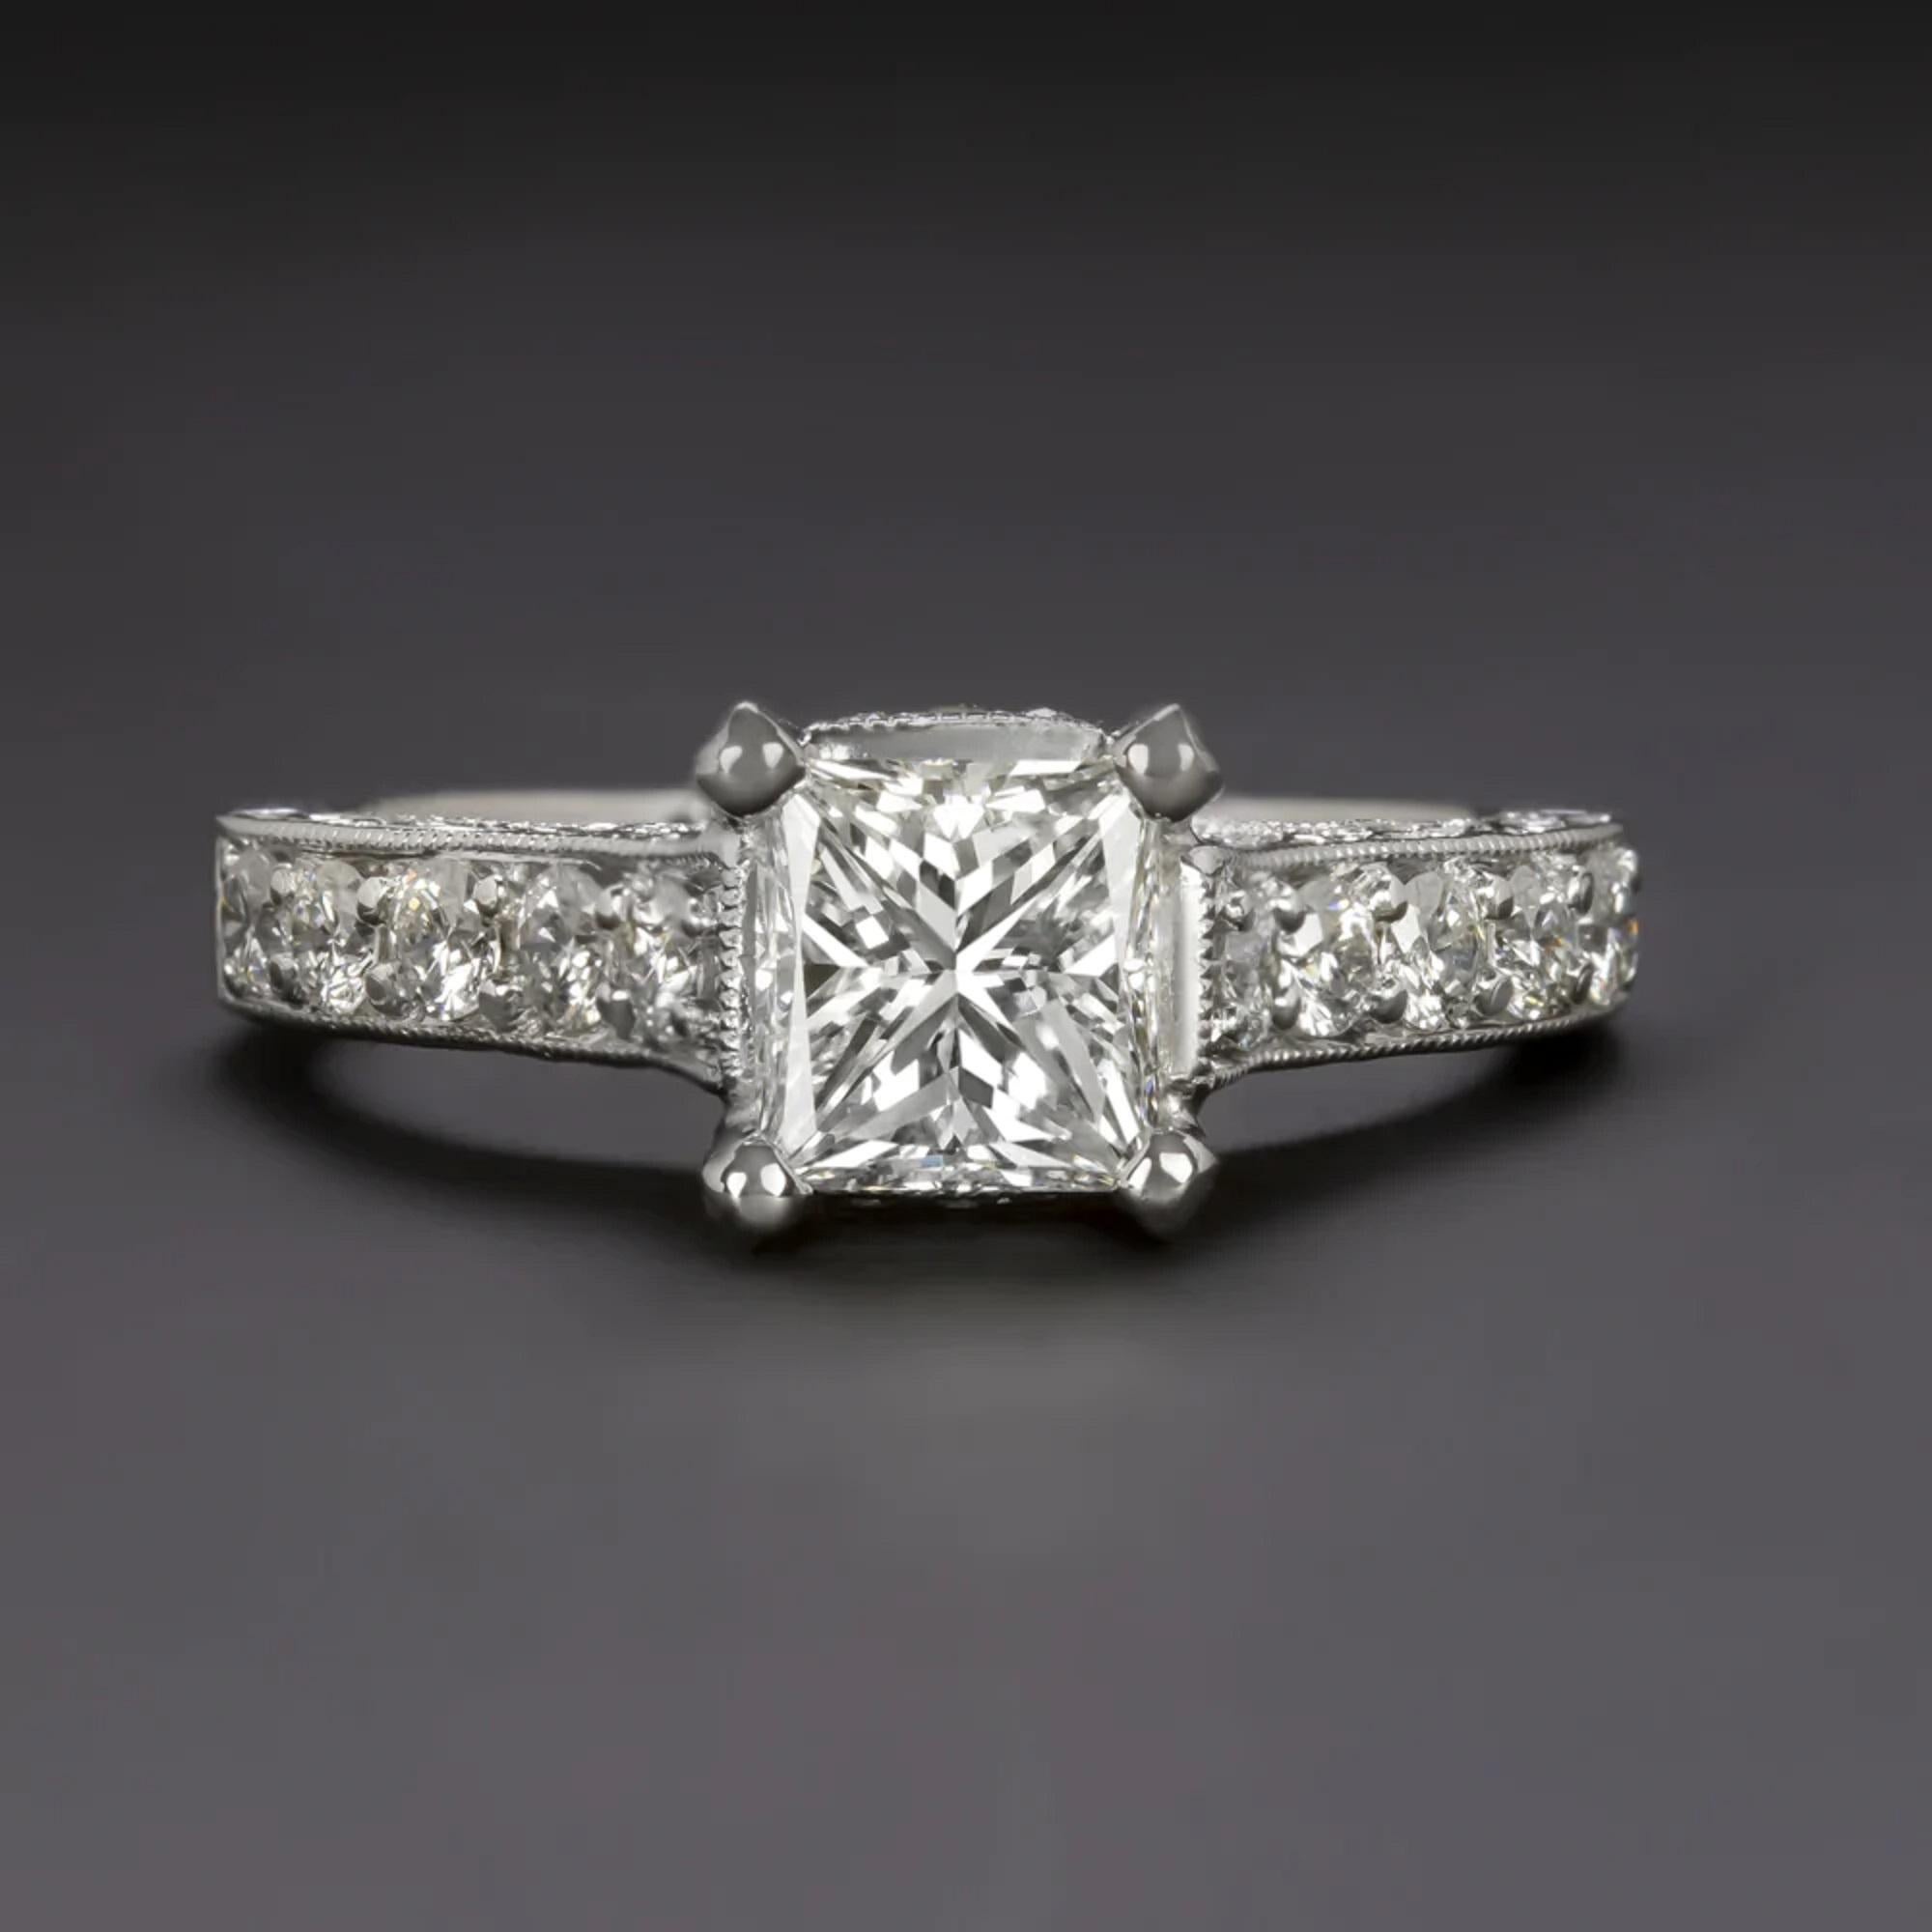 GIA certified G VS1 radiant cut diamond in a luxurious 18k white gold setting! The shank of the sleek and substantial setting glitter with excellent cut, bright white, and exceptionally clean accent diamonds and add a luxurious and refined touch.